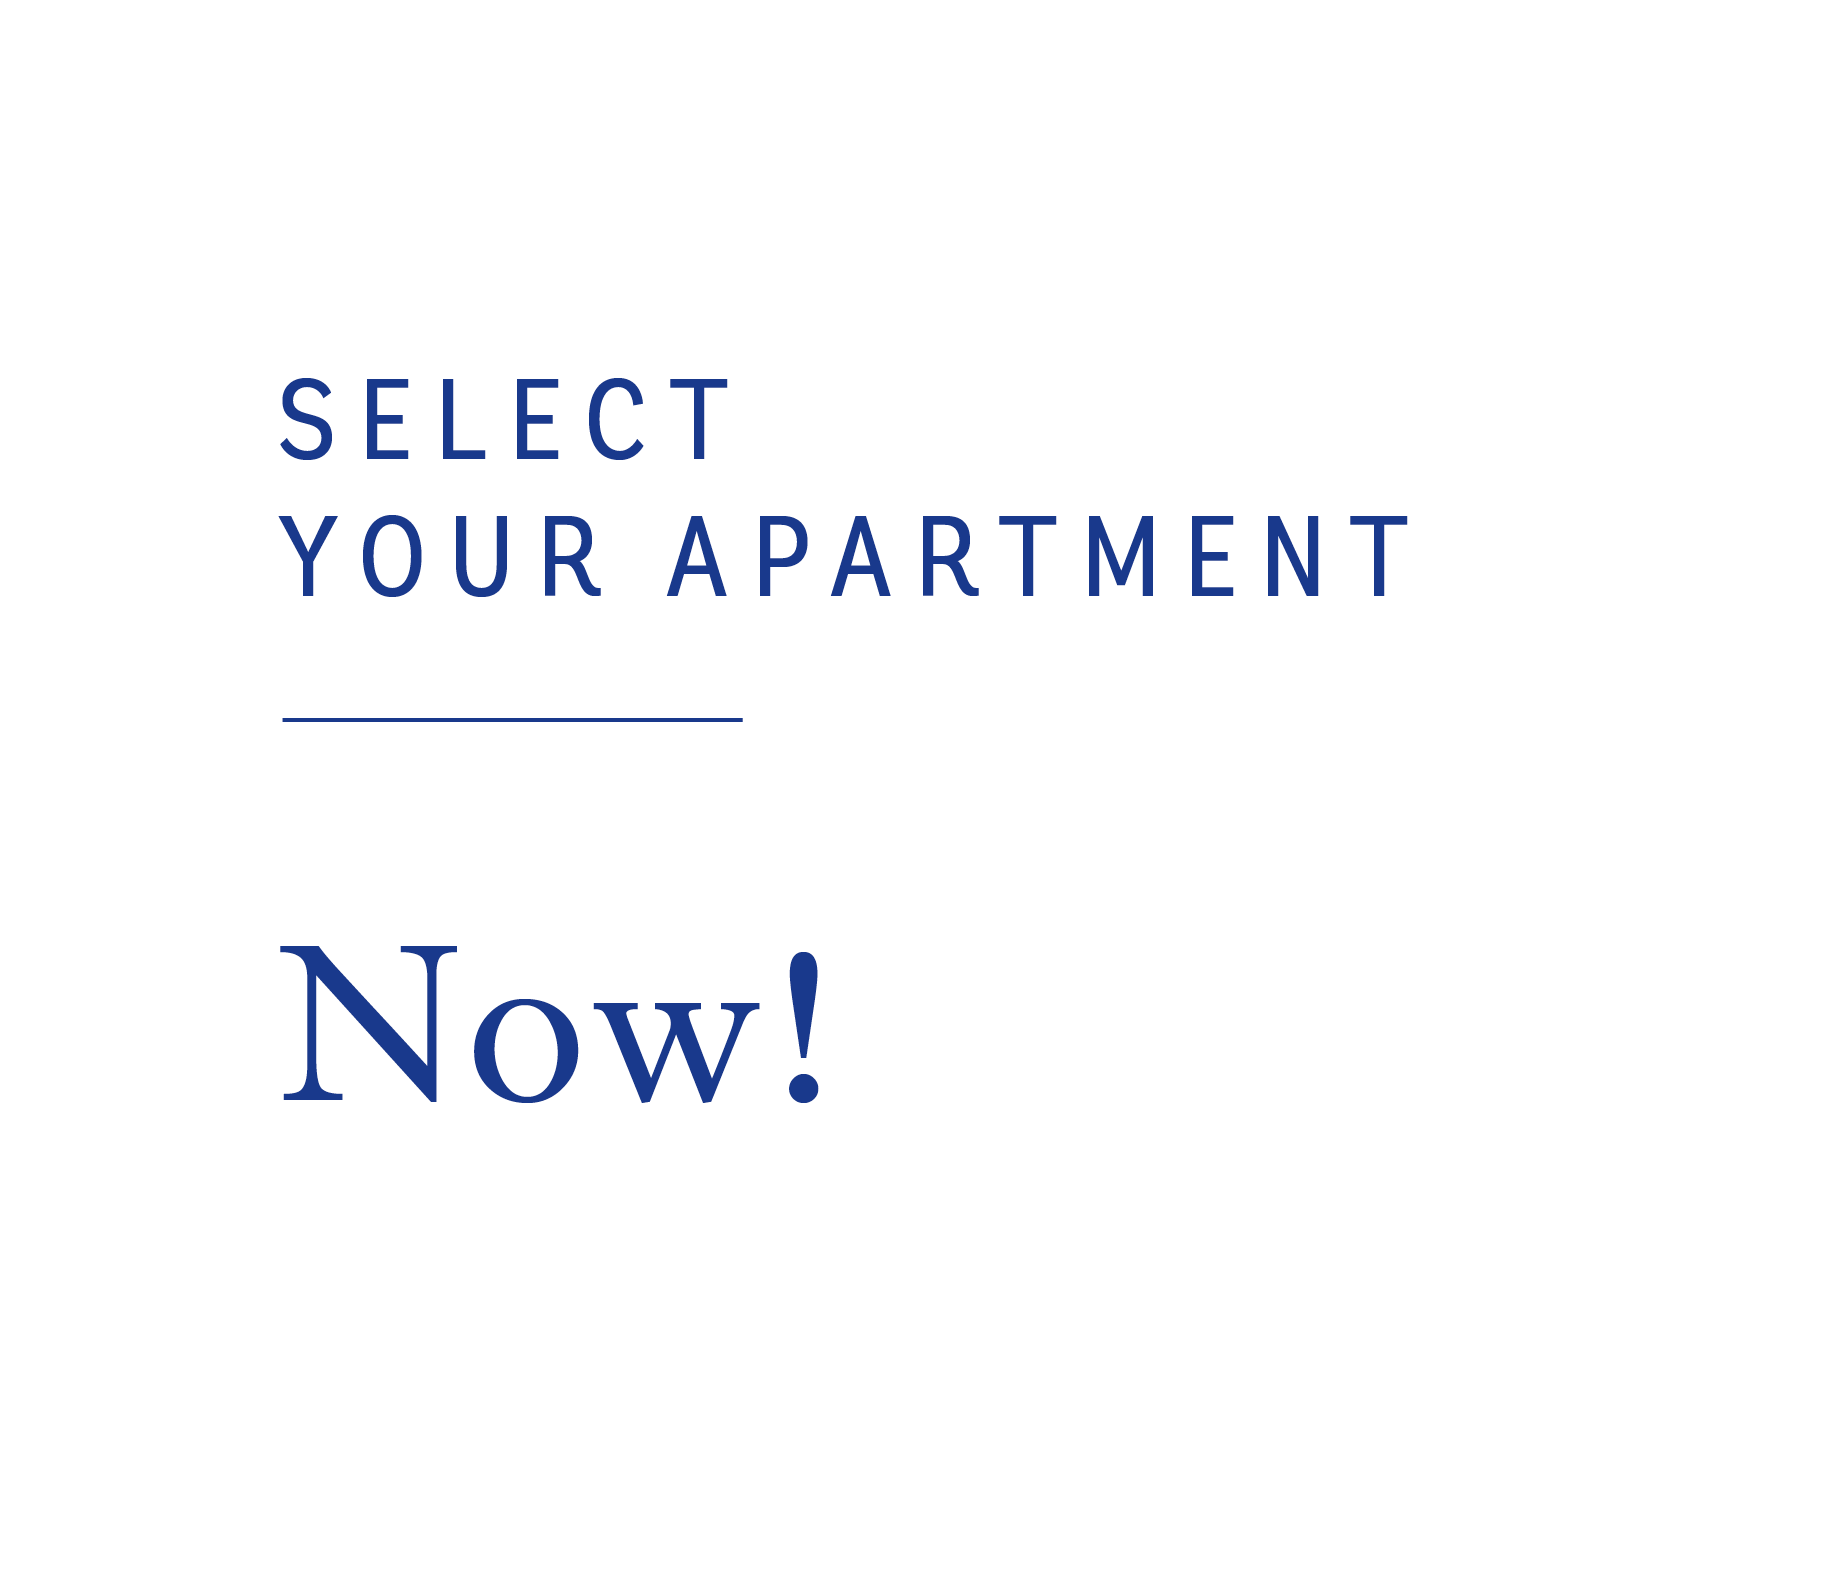 Select your apartement